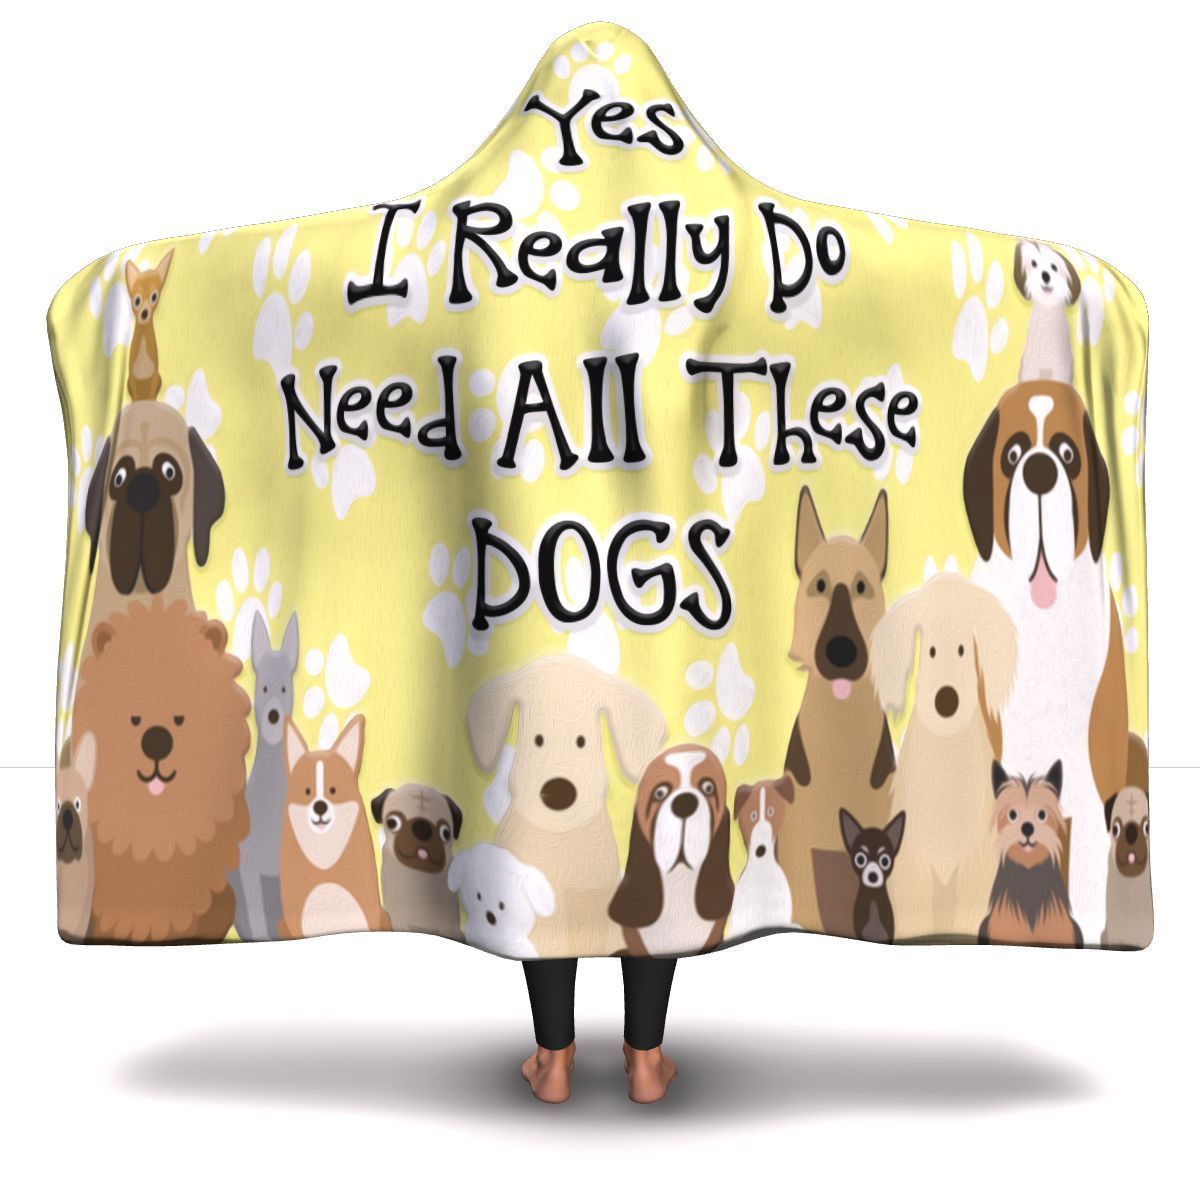 Yes I Need All These Dogs - Hooded Blanket.